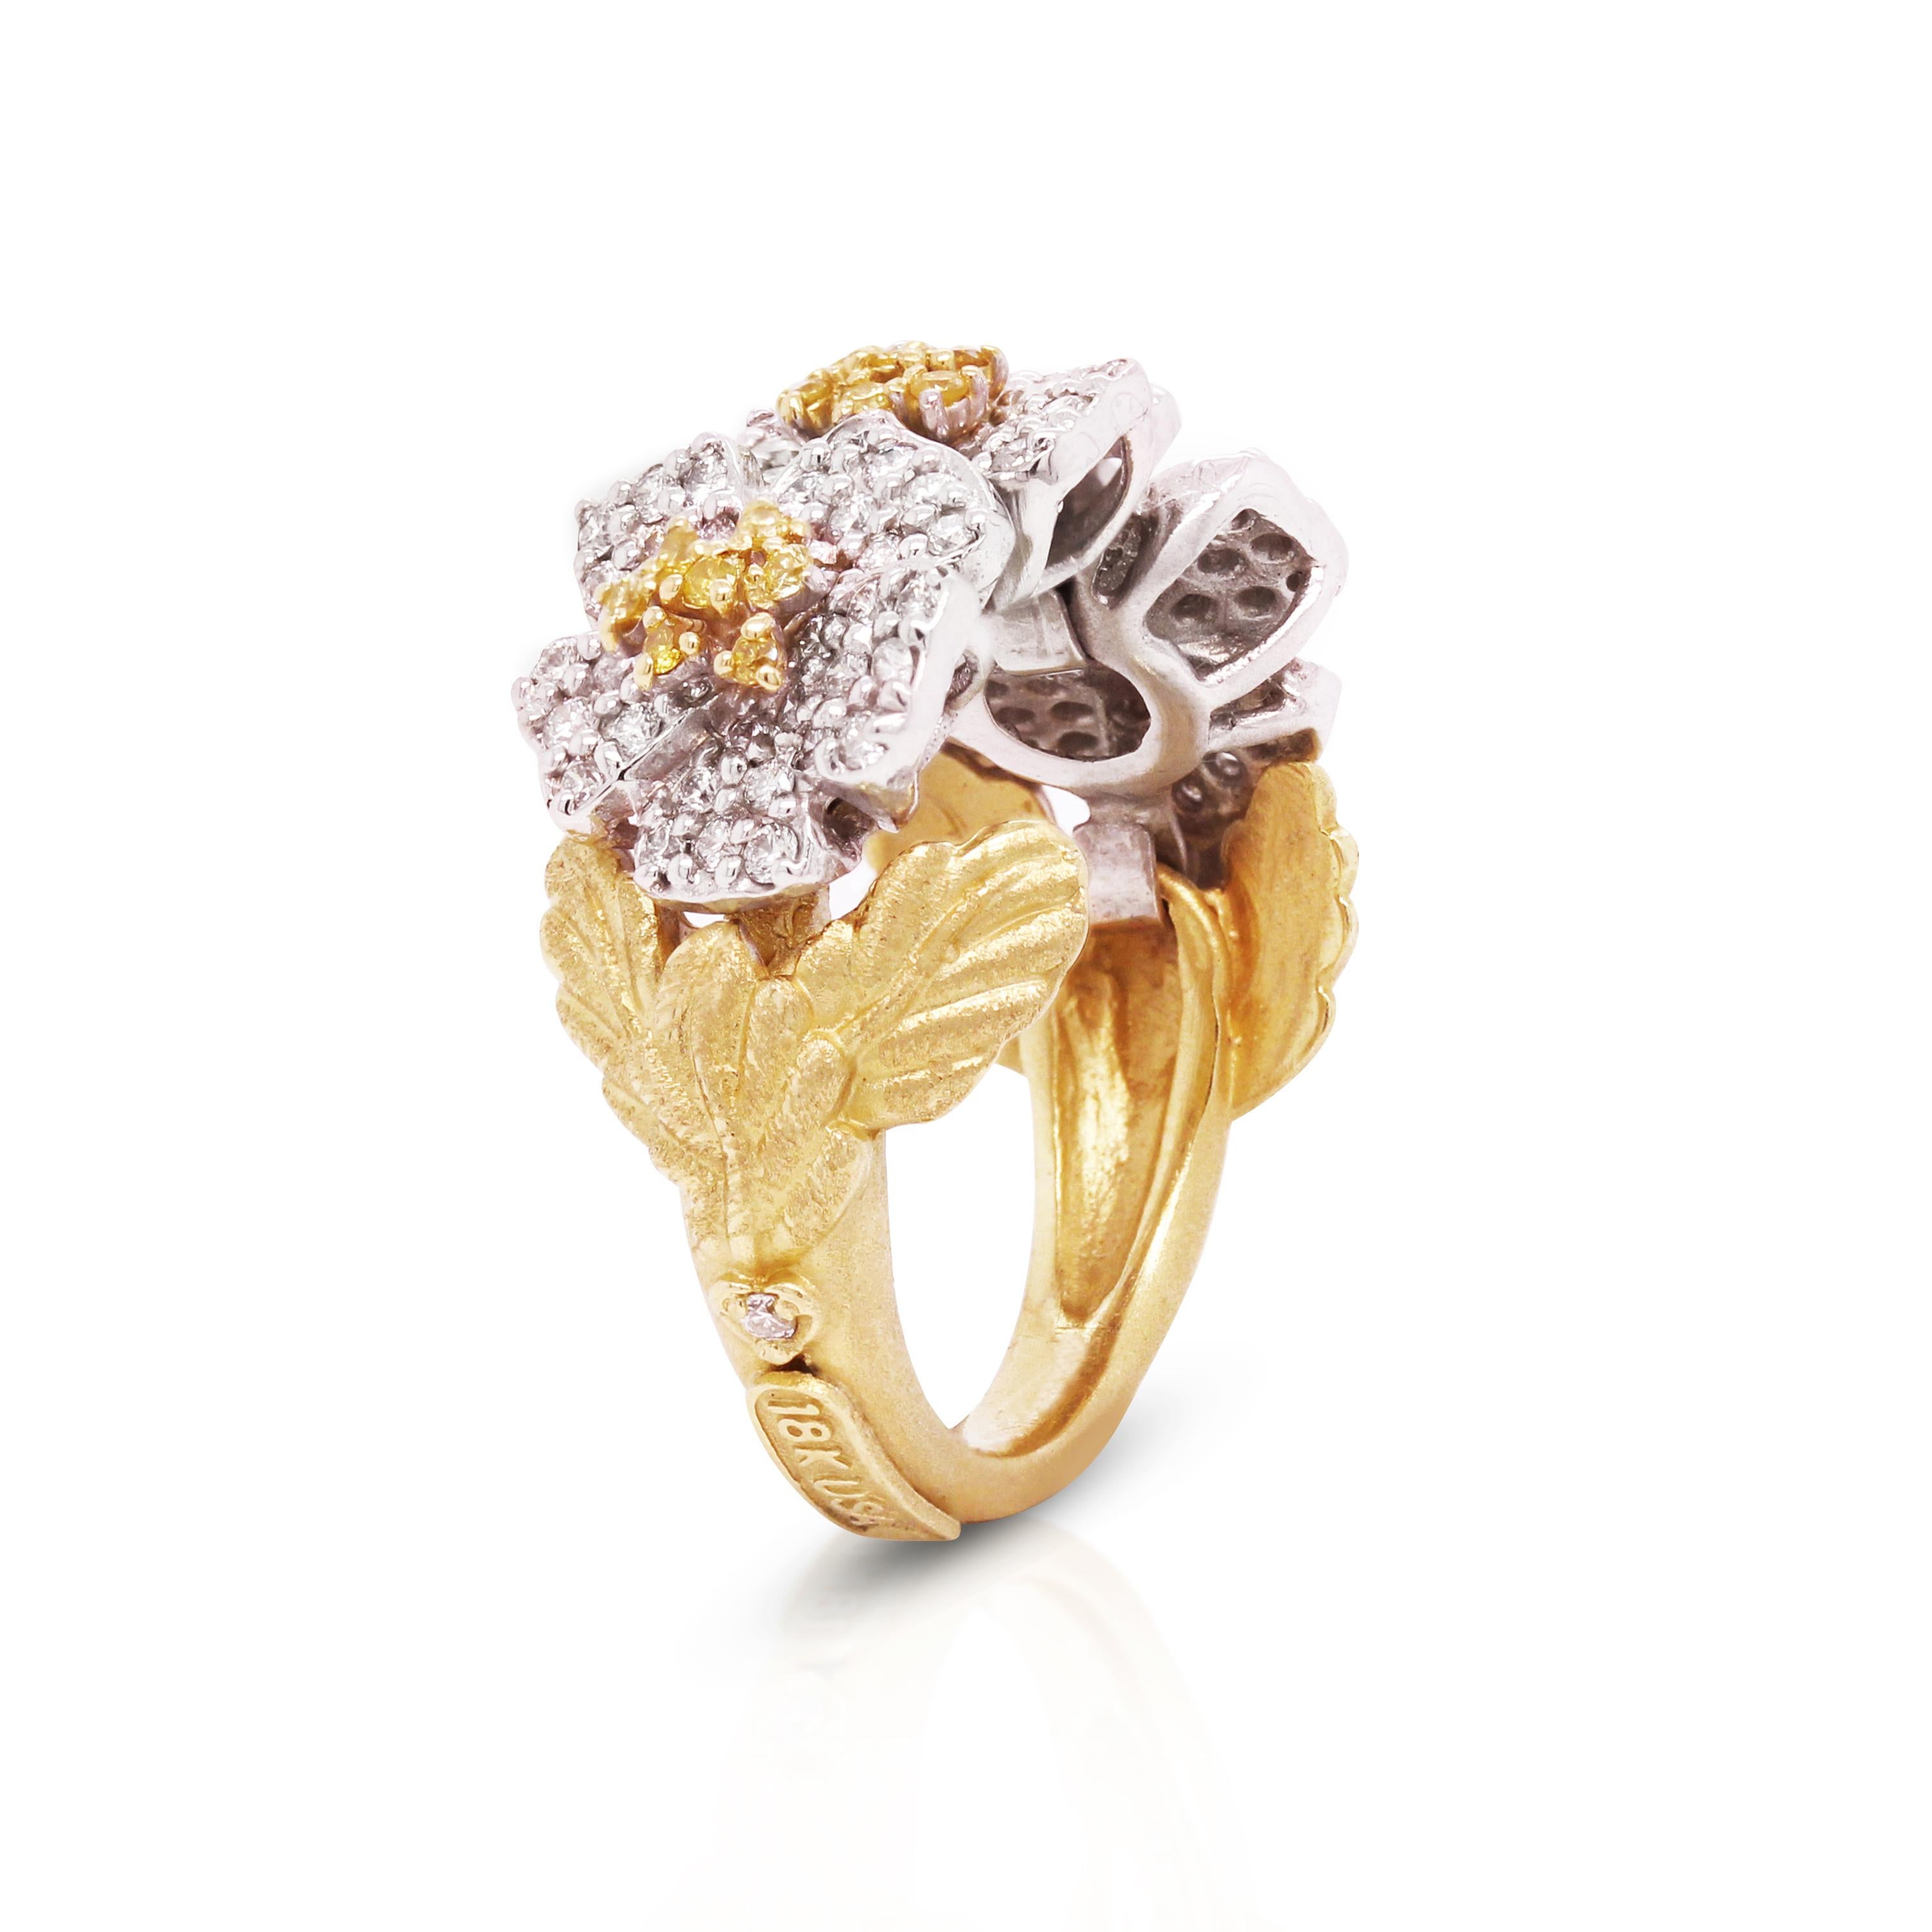 Stambolian 18K Gold Yellow White Diamond Floral Motif Three Flower Ring

From the 